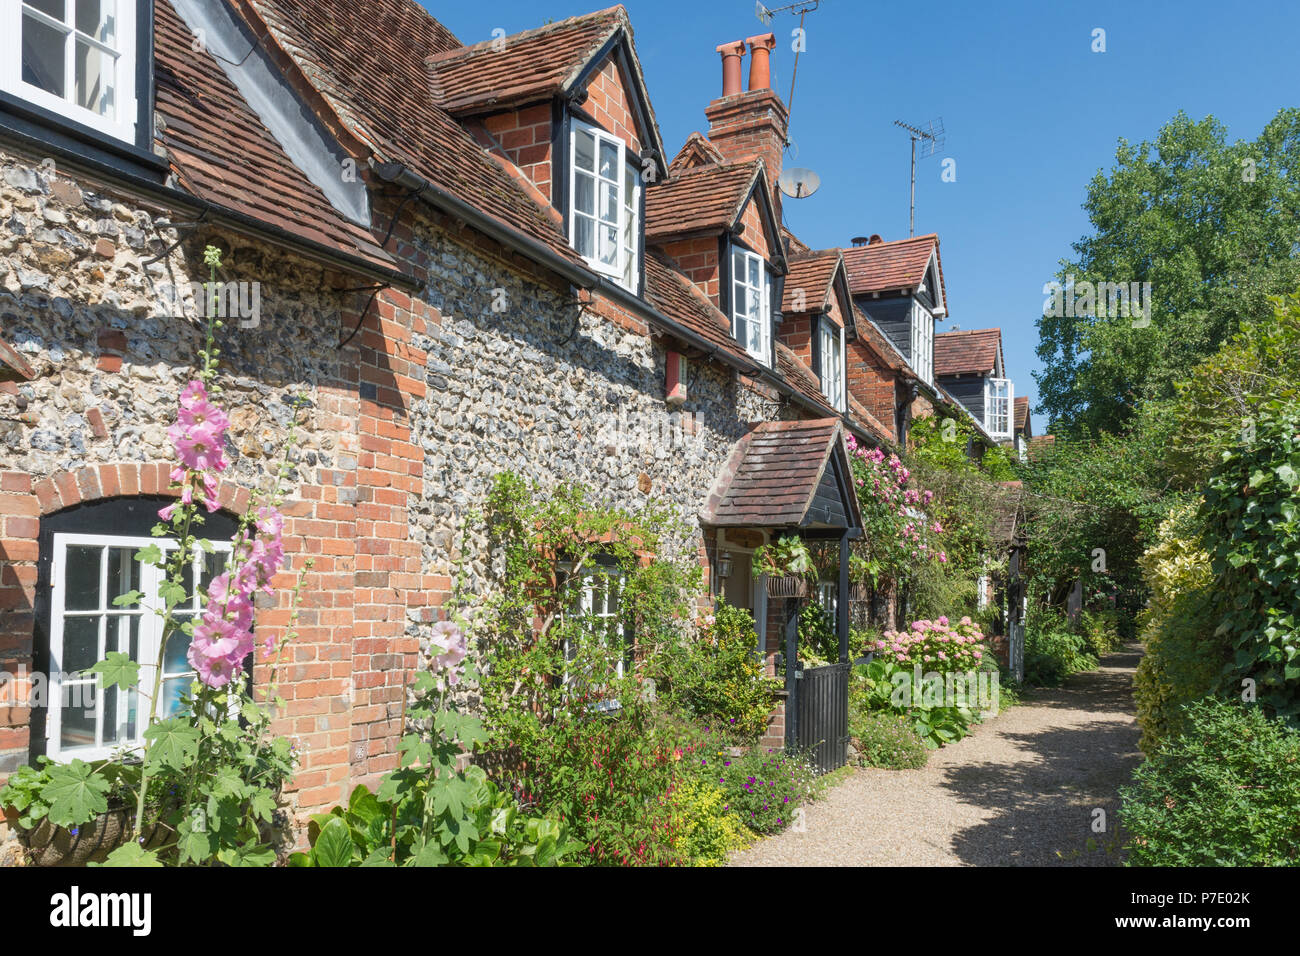 View of a row of quaint pretty cottages in Streatley village in West Berkshire, UK, on a sunny summer day Stock Photo